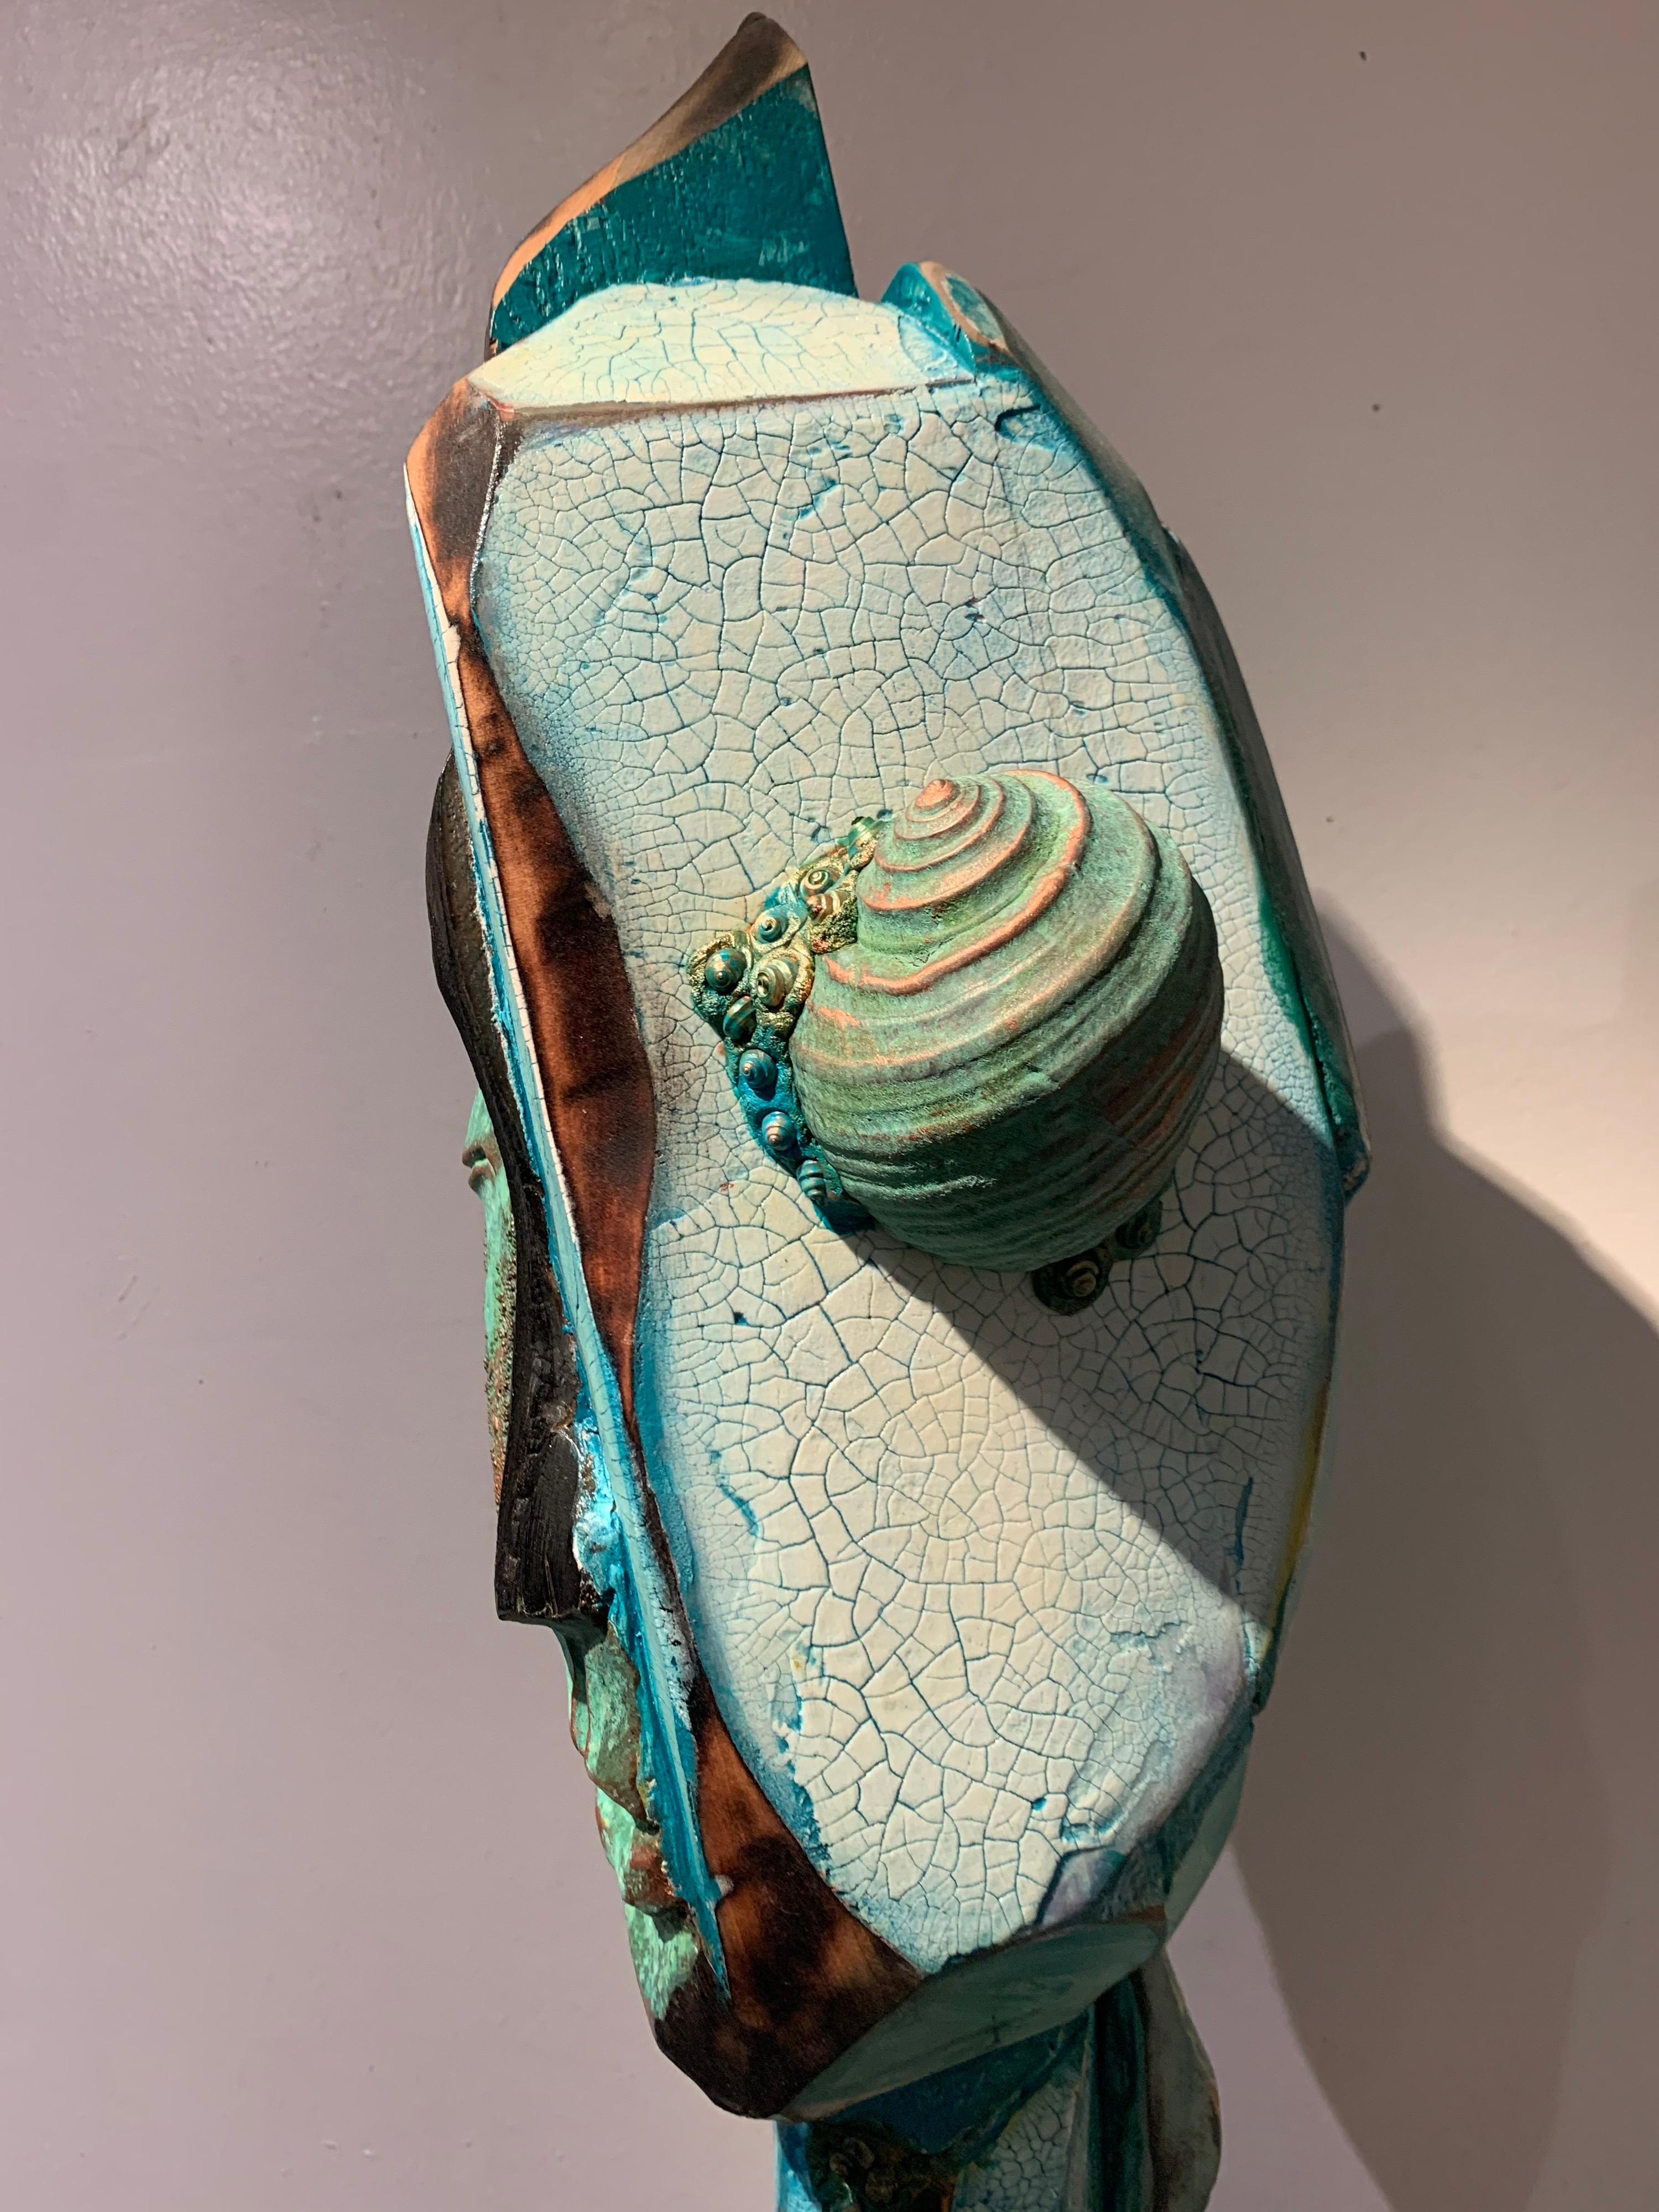 Listening, wood, acrylic, mixed media sculpture, green, blue, off white, brown 4